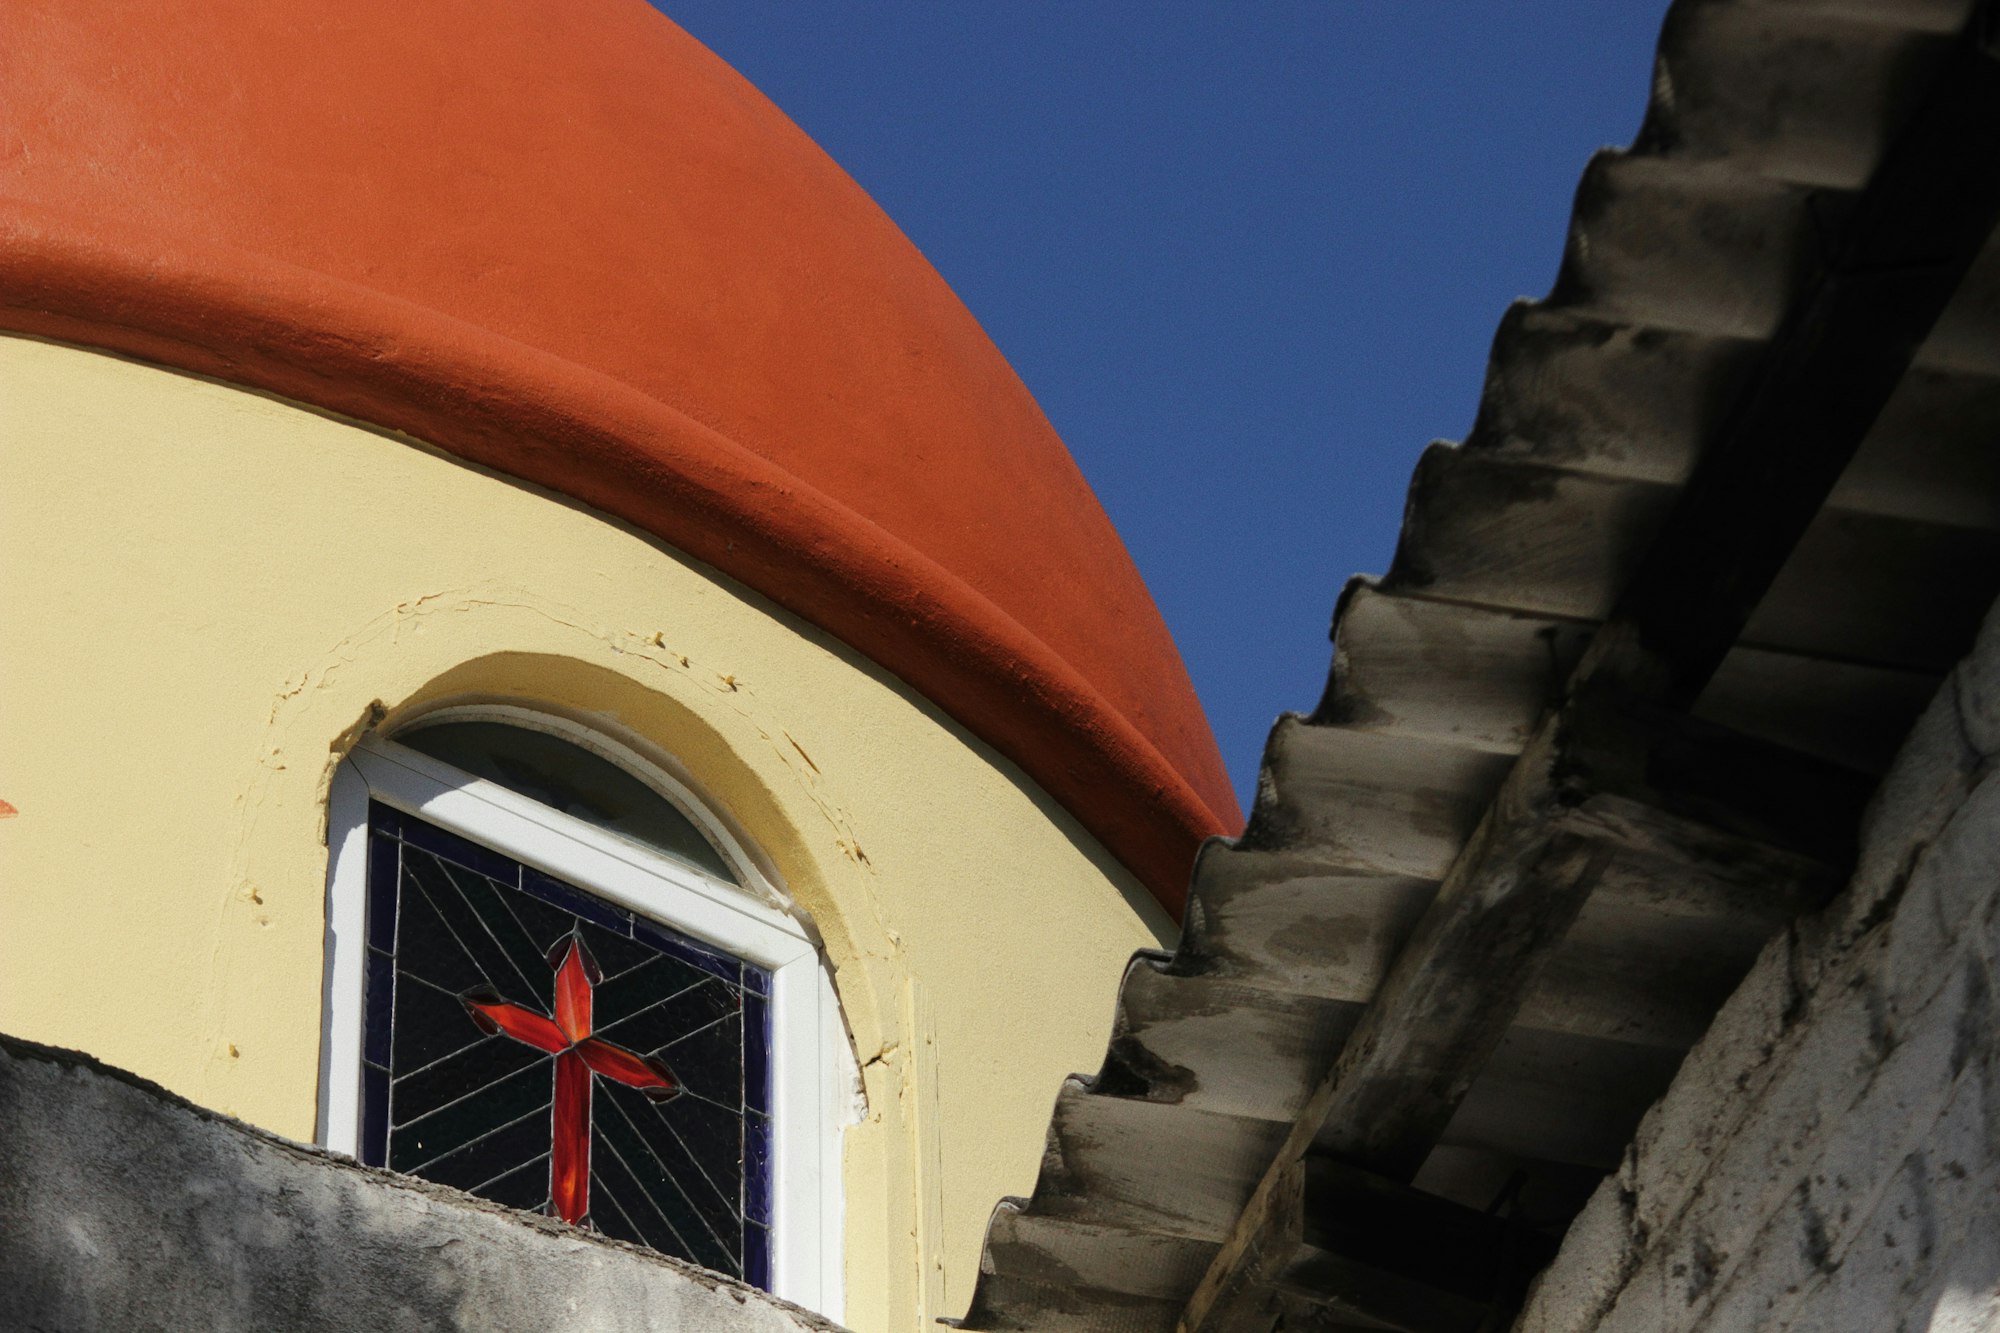 Church, Mexico, cross, red, blue, architecture, overlapping 